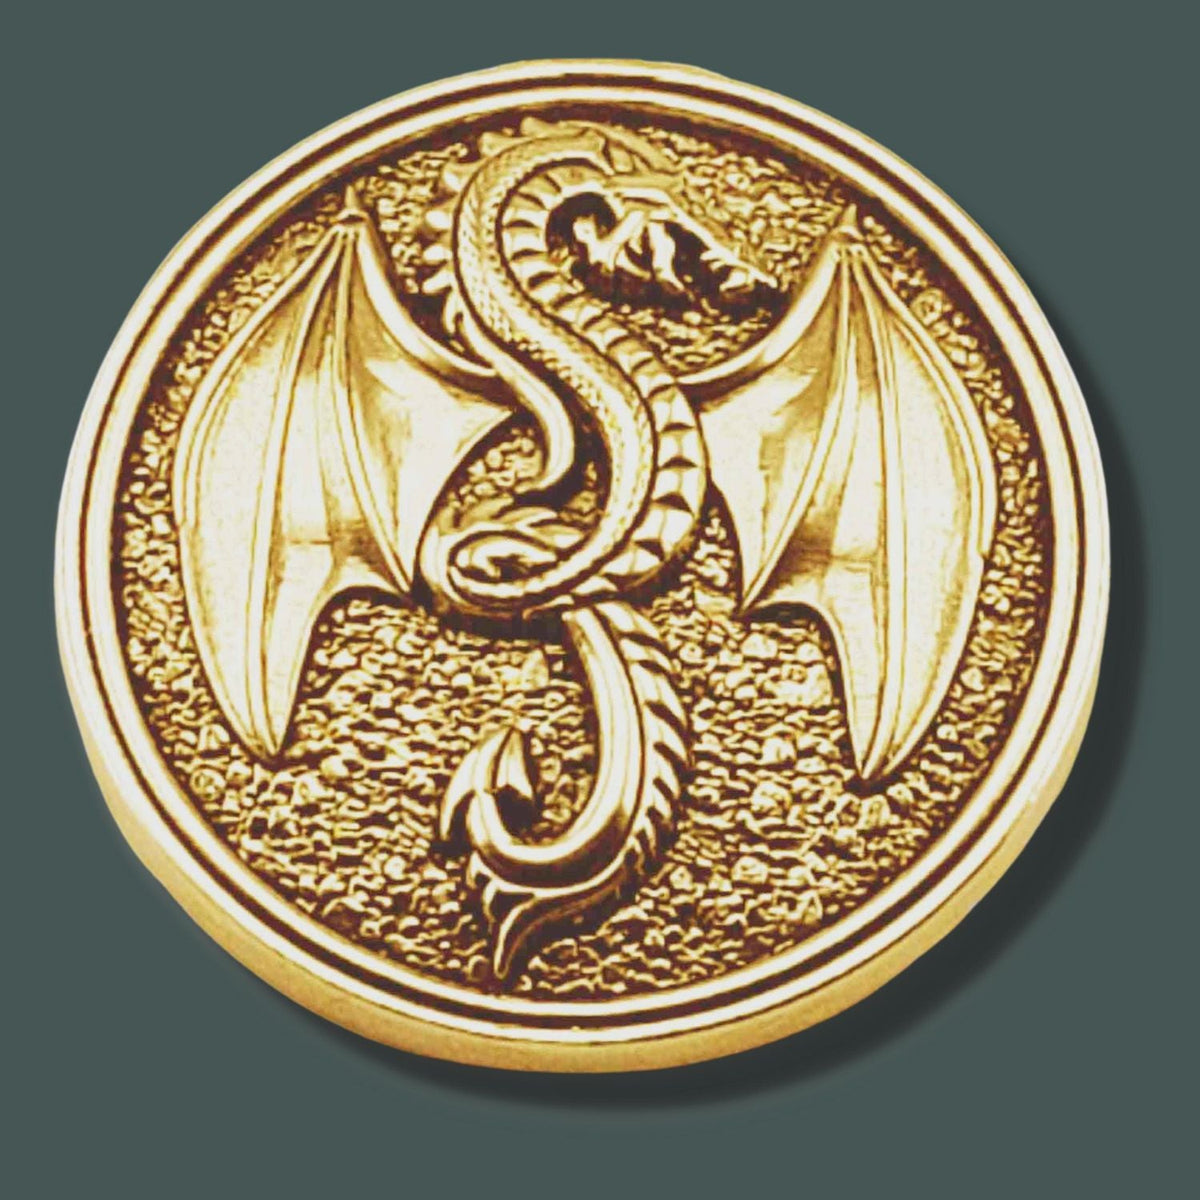 DRACO THE DRAGON Pendant - Starting at $149 - Celtic Jewelscapes